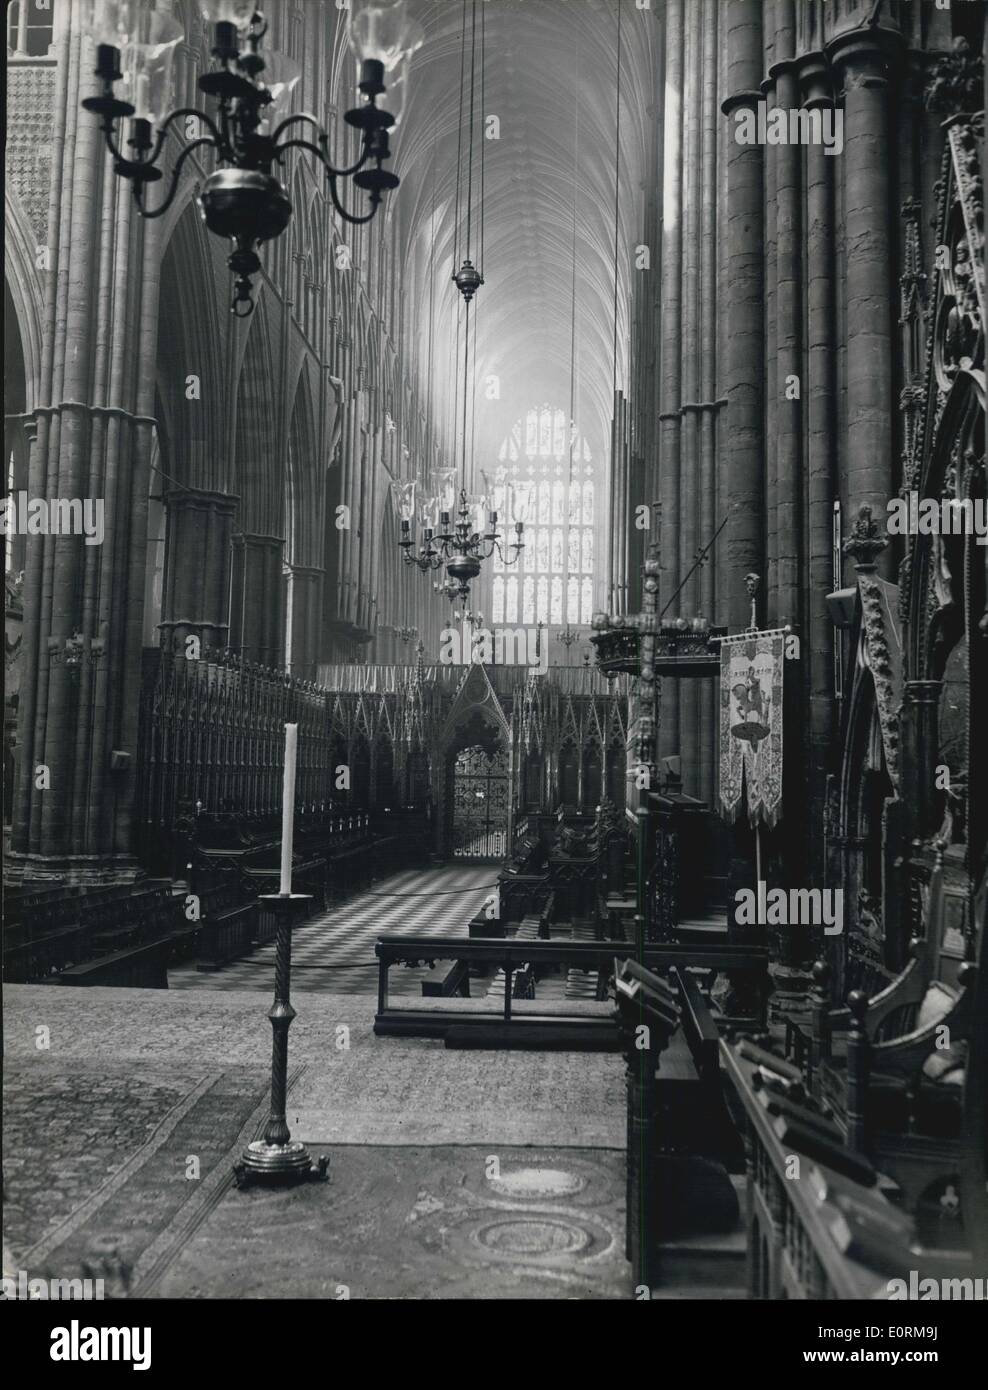 Jan 1, 1960 - Westminster Abbey - scene of the coronation.: Looking down the Nave from the steps of the High Altar in the Sanctuary of Westminster Abbey where Queen Elizabeth will be crowned. On right and left are the choir stalls. Founder of Westminster Abbey was Edward the Confessor who is buried there. At the end of the Nave is the West Door through which the Queen will enter for the Ceremony. Stock Photo